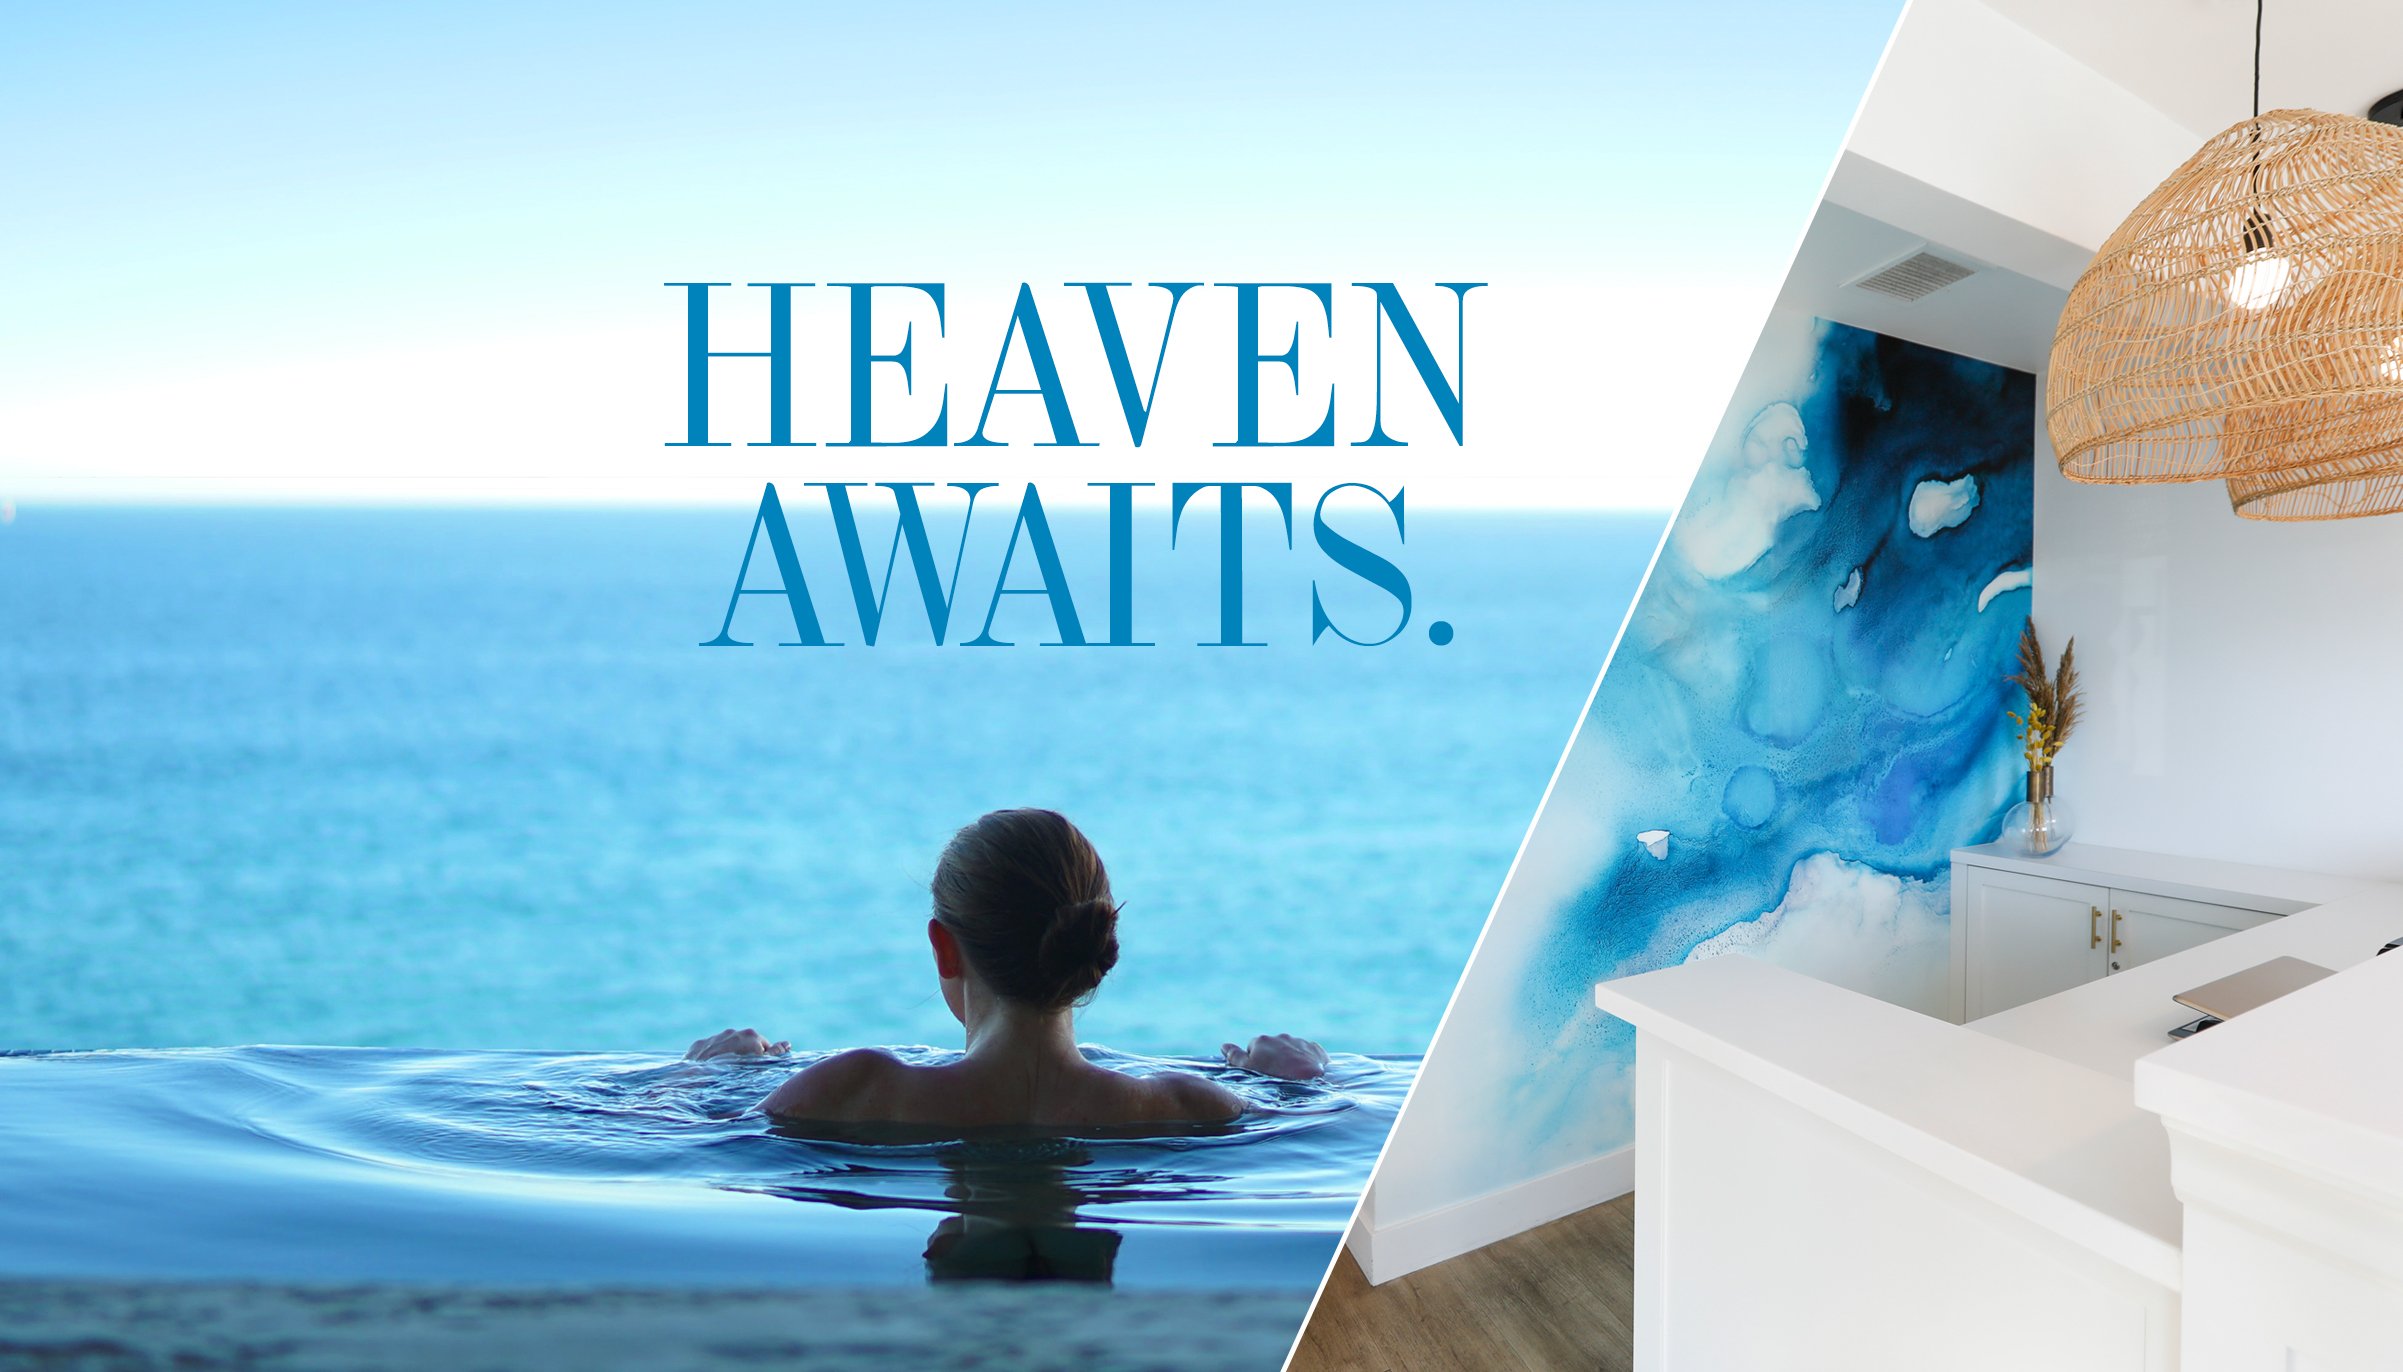 Heaven Hut Spa - All You Need to Know BEFORE You Go (with Photos)